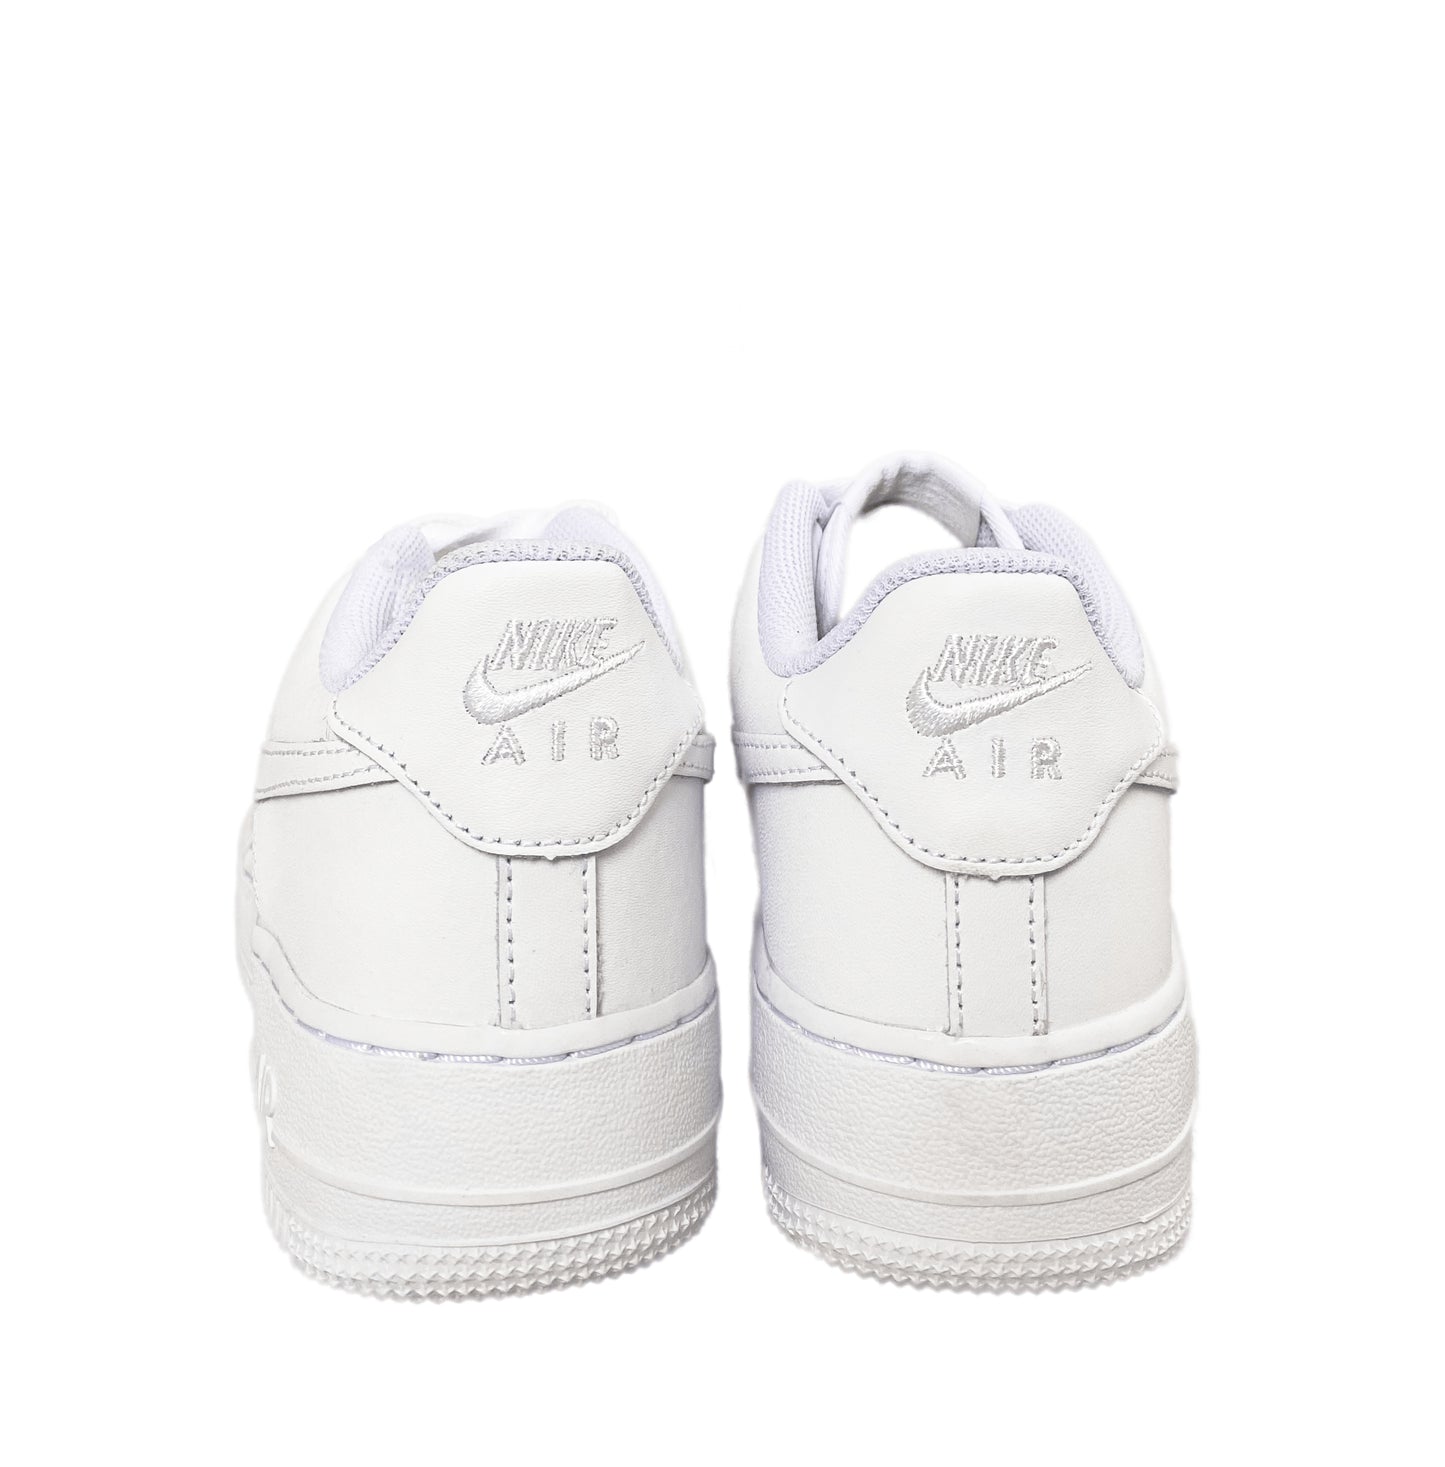 NIKE AIR FORCE 1 LOW "WHITE" (GS)